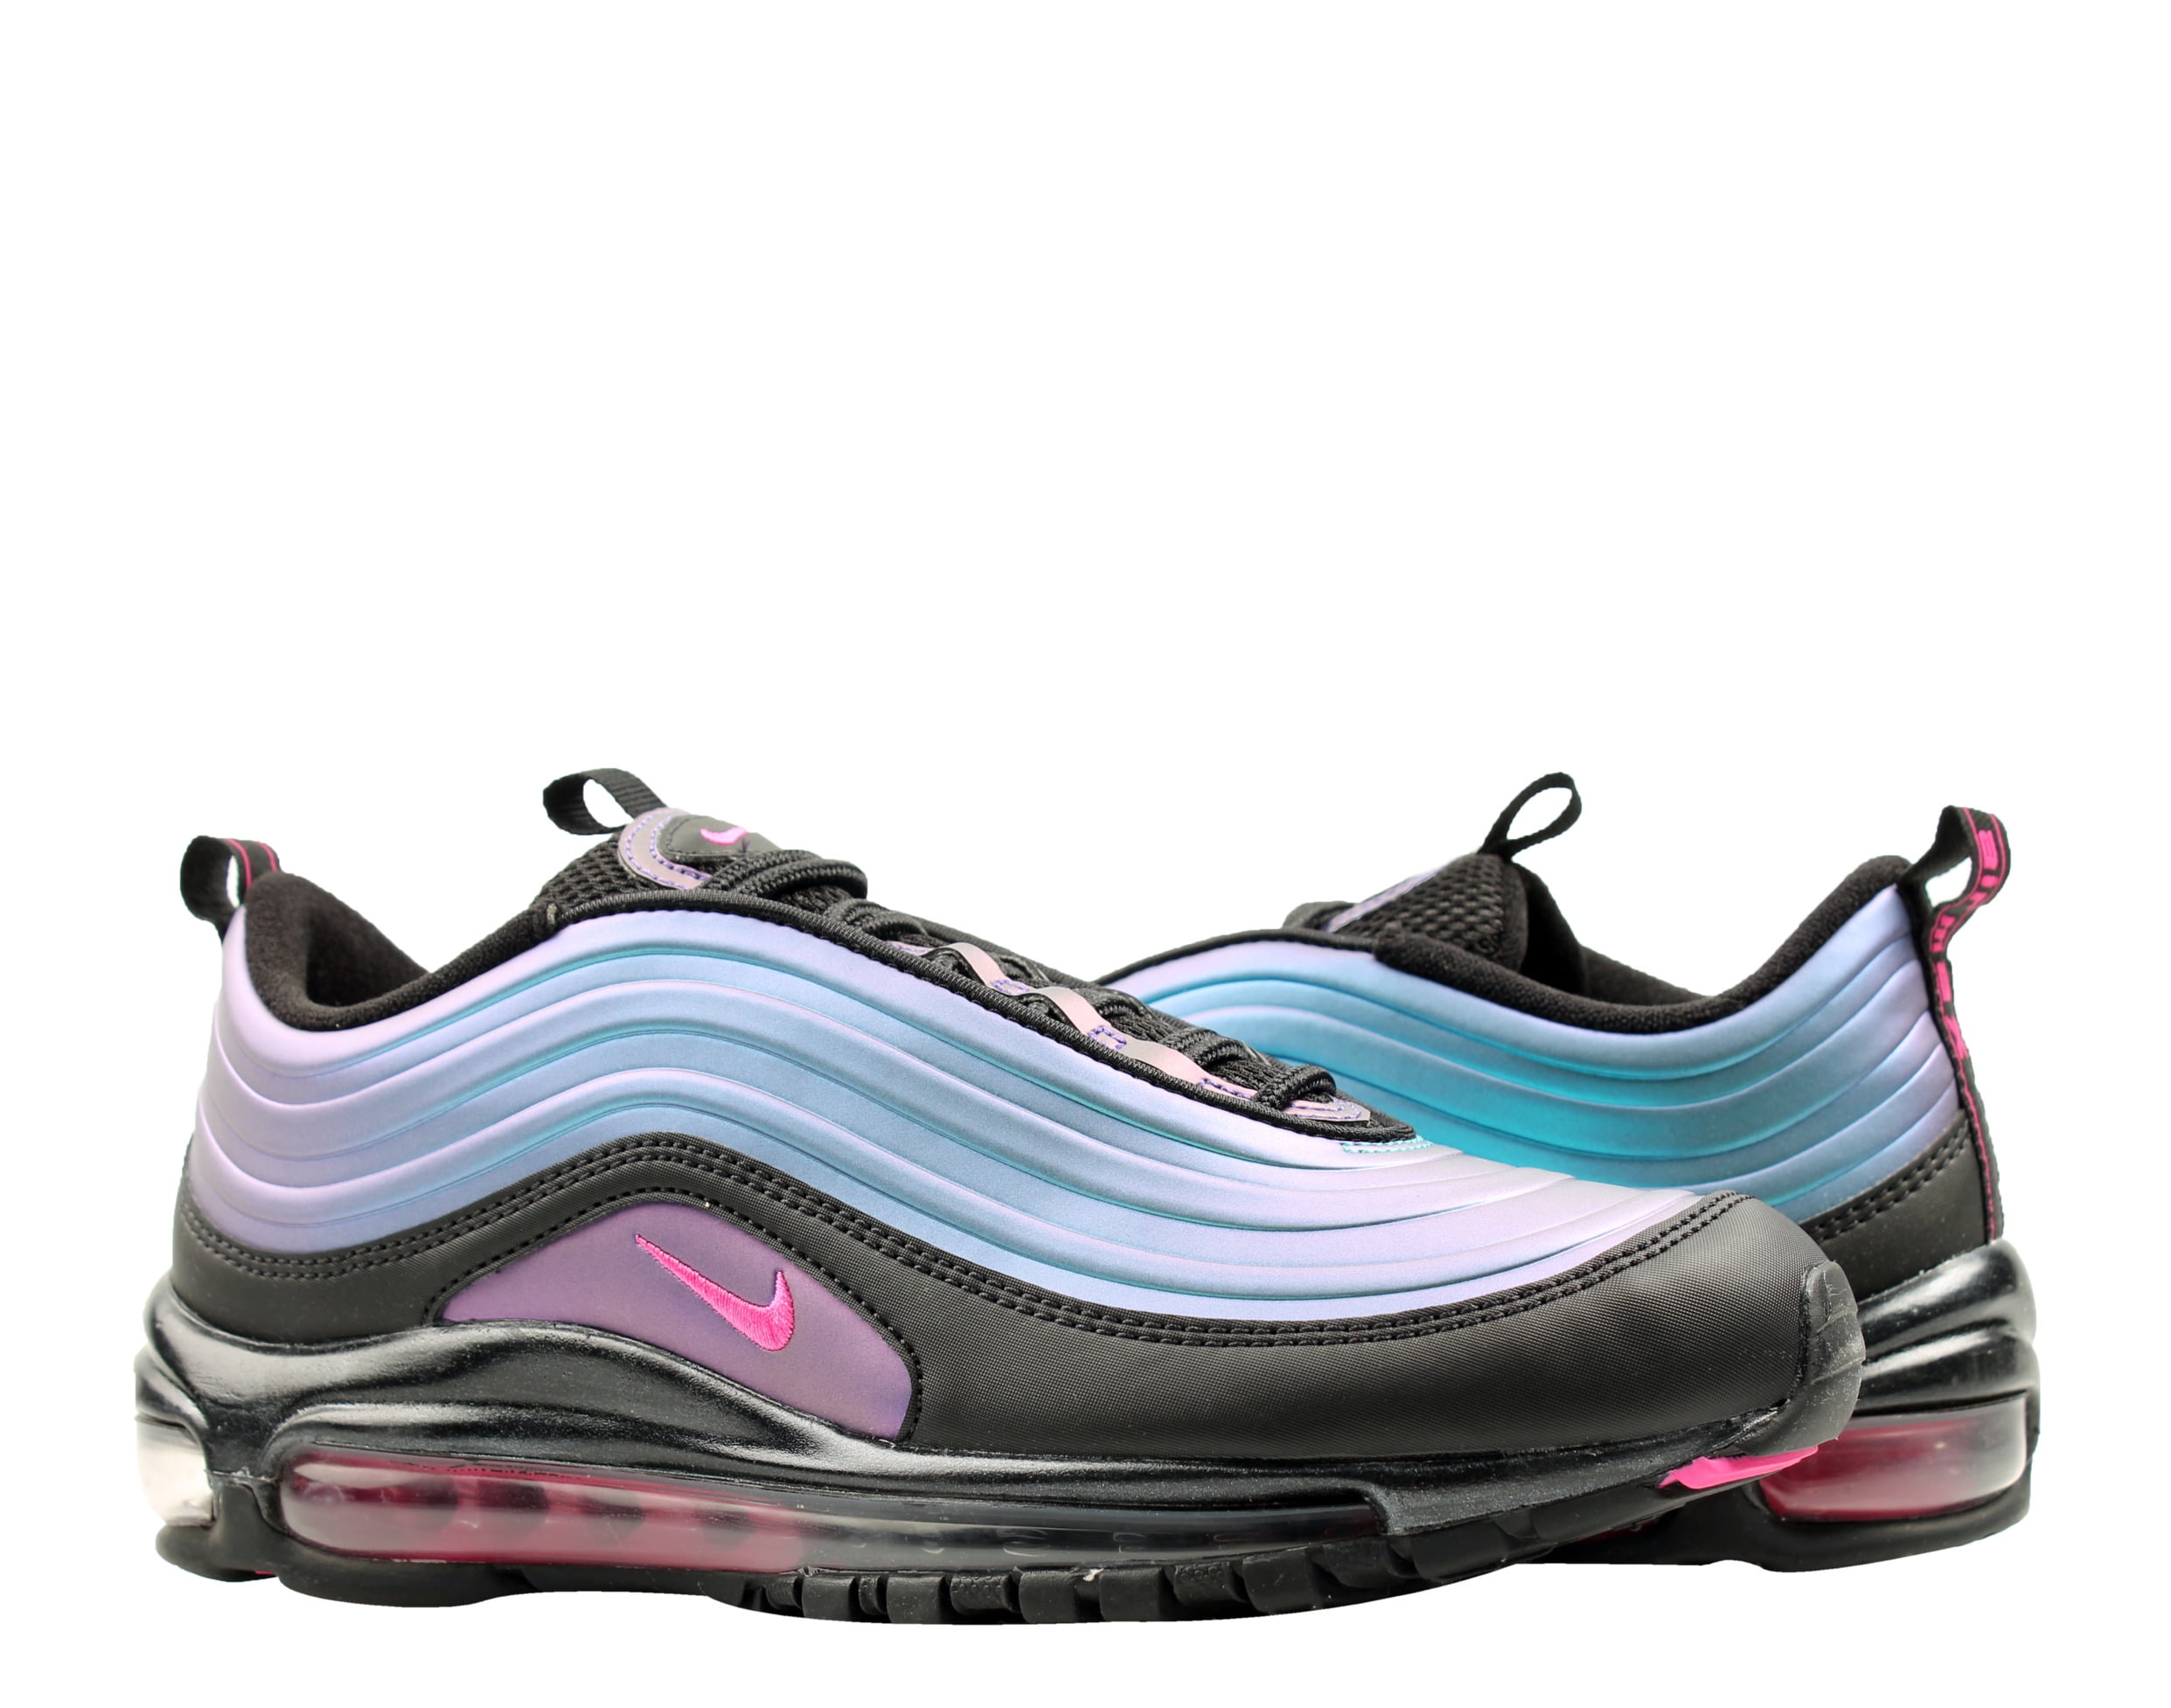 Nike Air Max 97 LX Men's Running Shoes Size 8